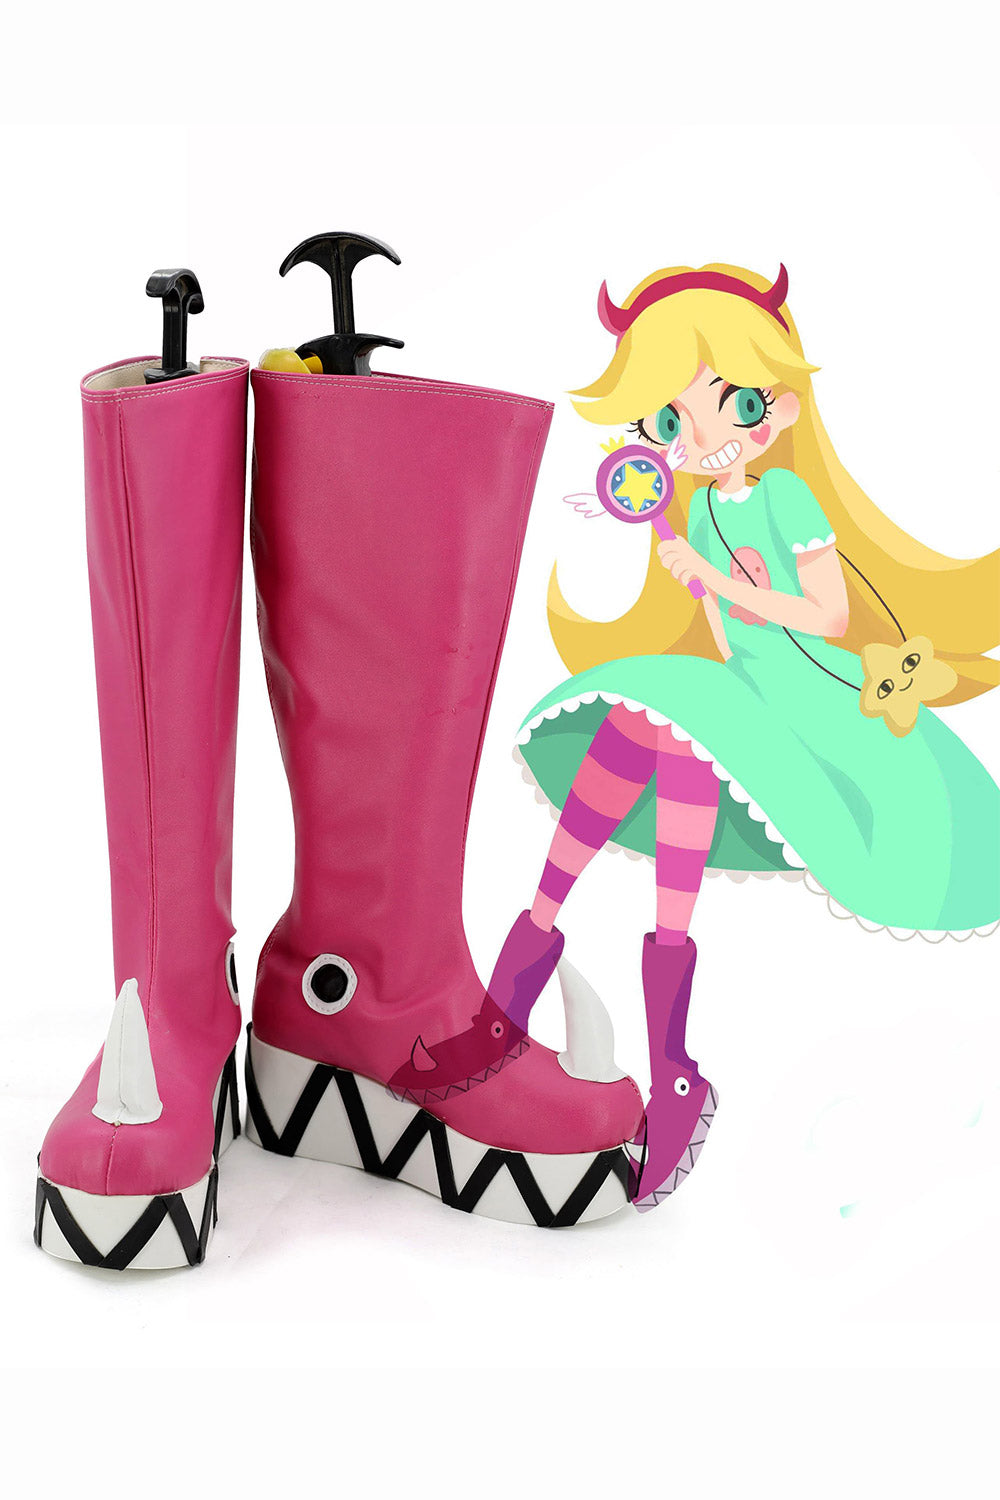 Star Butterfly Disney Princesse Bottes Cosplay Chaussures